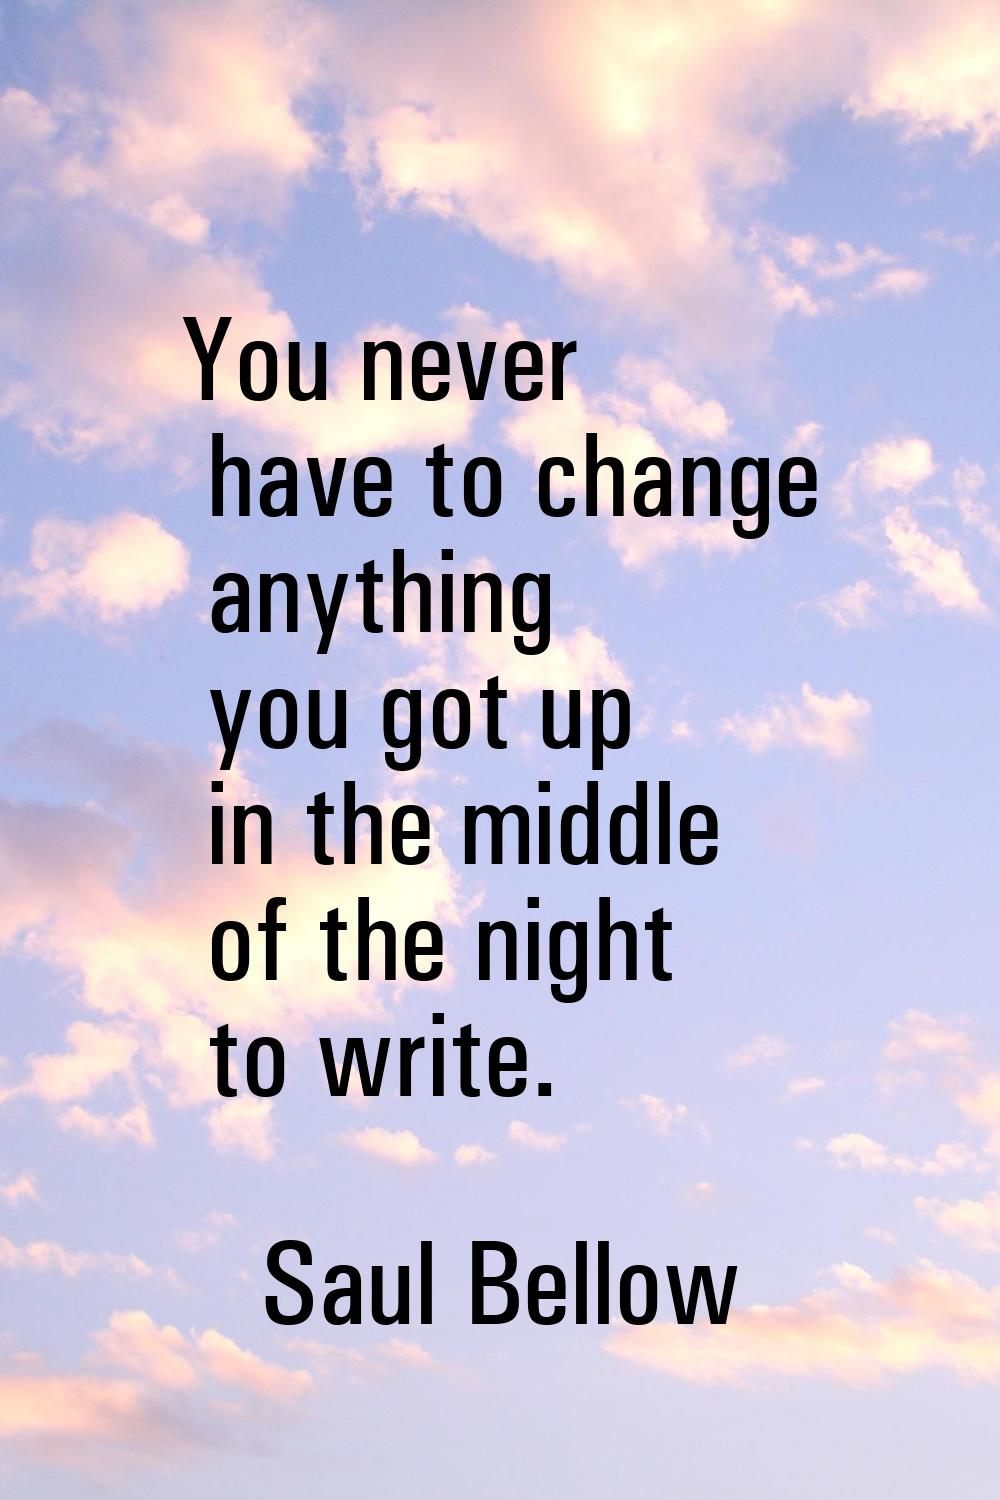 You never have to change anything you got up in the middle of the night to write.